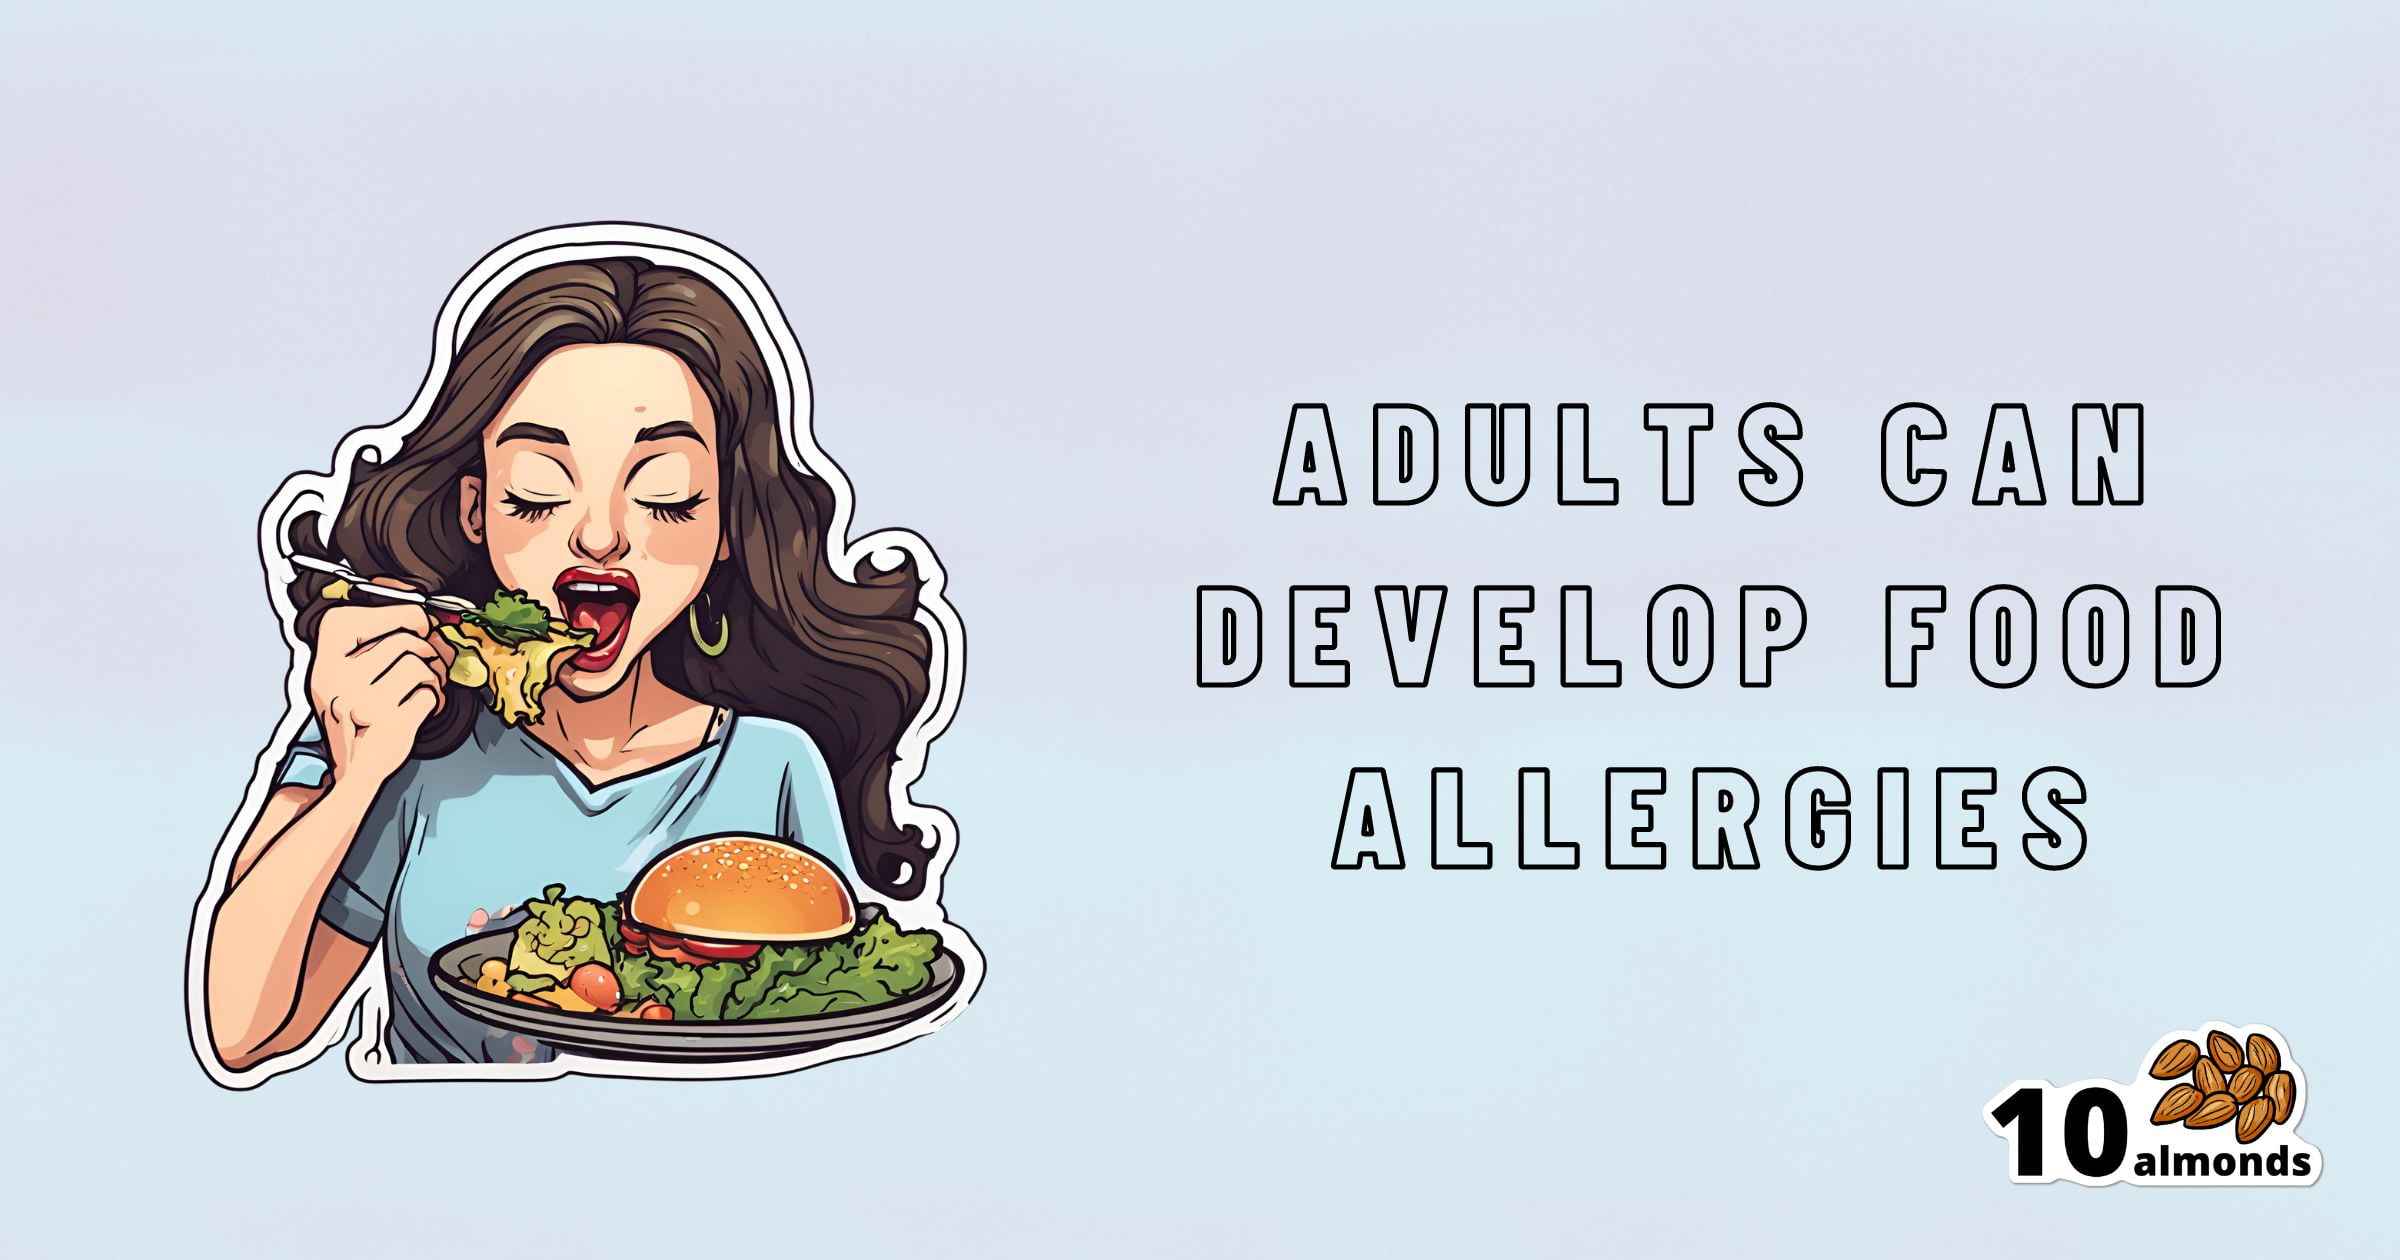 Illustration of a woman eating a salad with a burger next to text that reads, "Types of adult food allergies." The bottom right corner features an image of ten almonds.